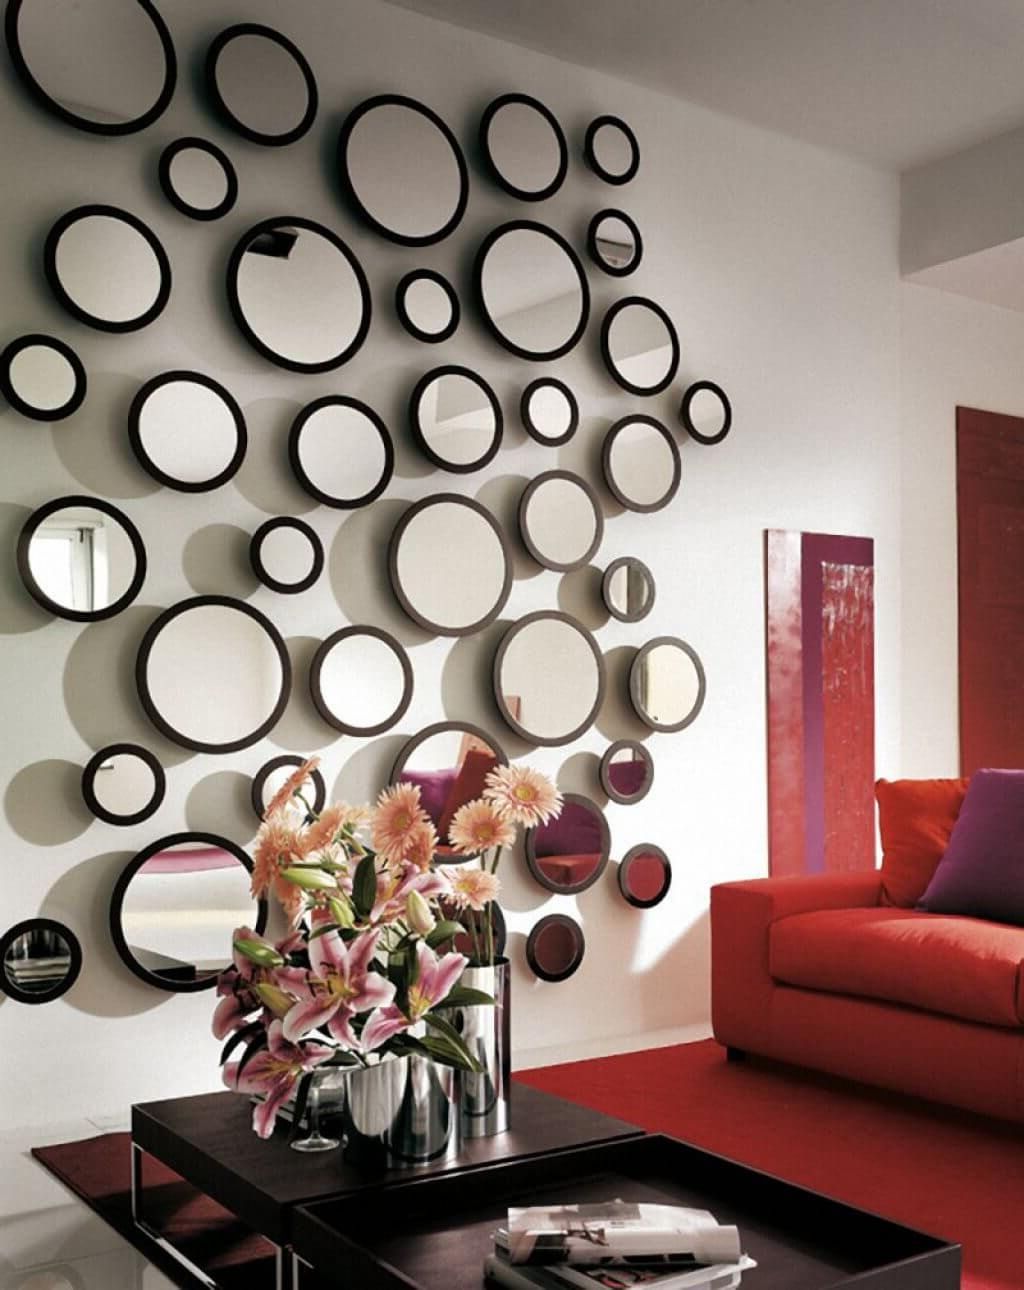 Preferred 33 Best Mirror Decoration Ideas And Designs For 2019 Regarding Small Decorative Wall Mirrors (View 11 of 20)